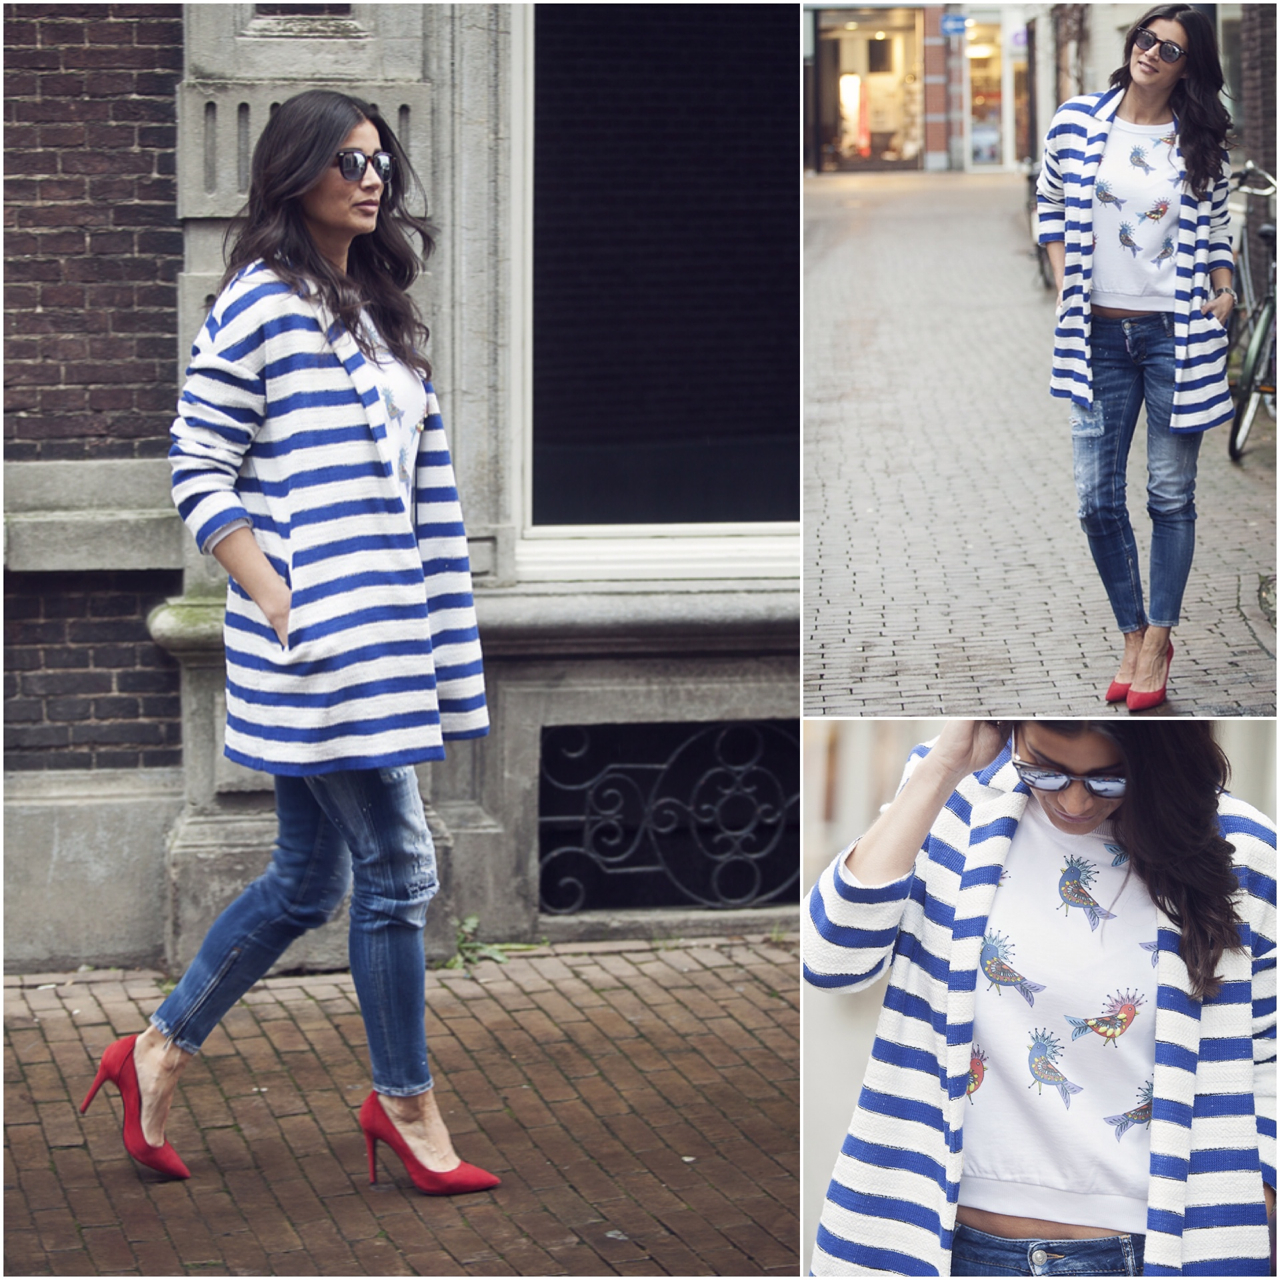 streetstyle photography BlogForShops for Jimmy's Mode in Tilburg wearing striped blazer Pinko DSquared jeans